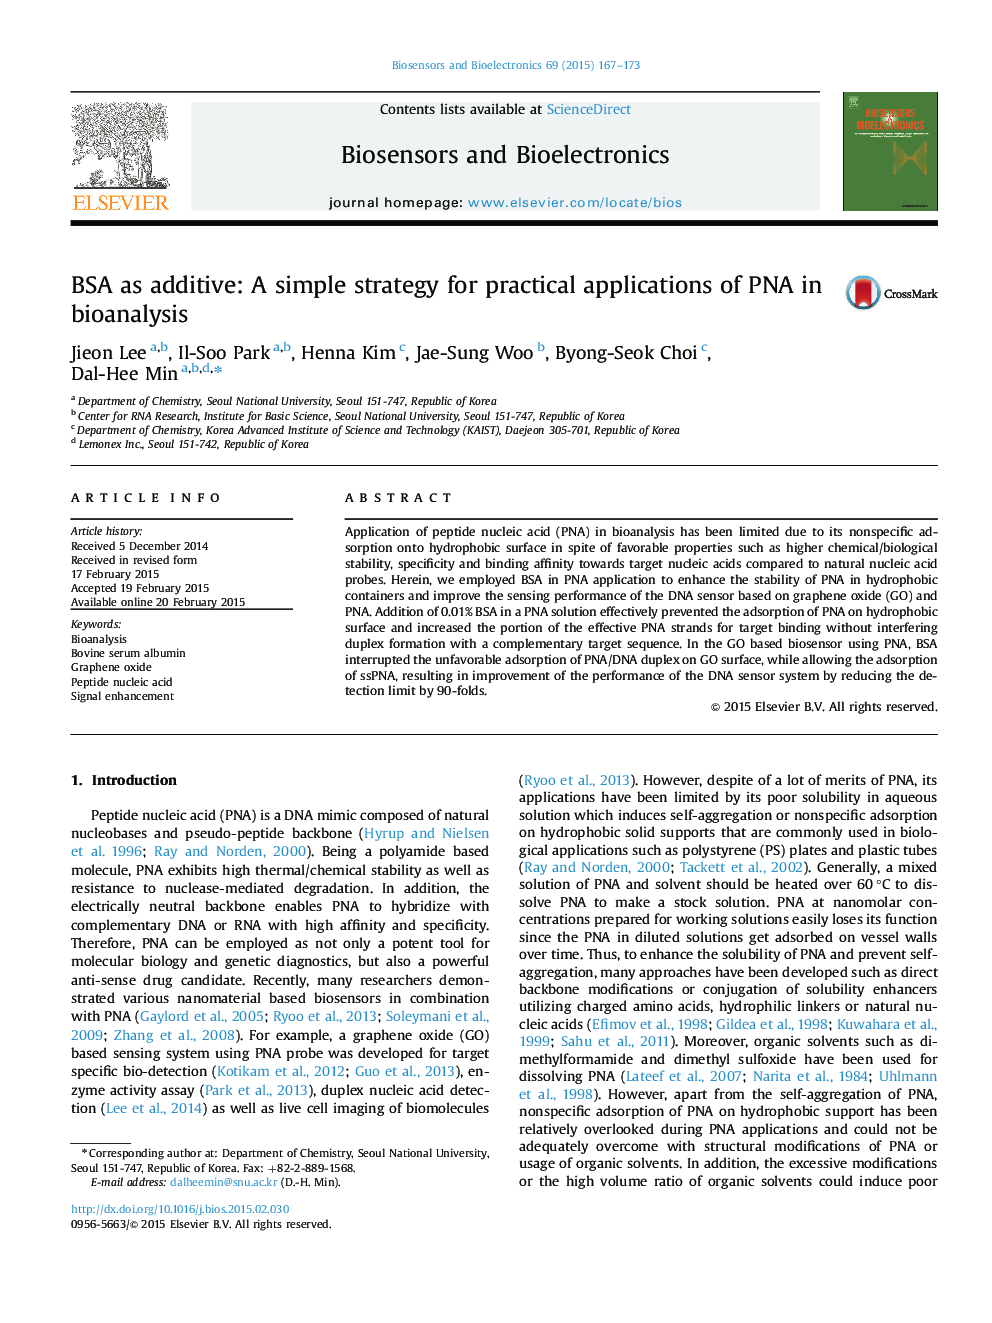 BSA as additive: A simple strategy for practical applications of PNA in bioanalysis